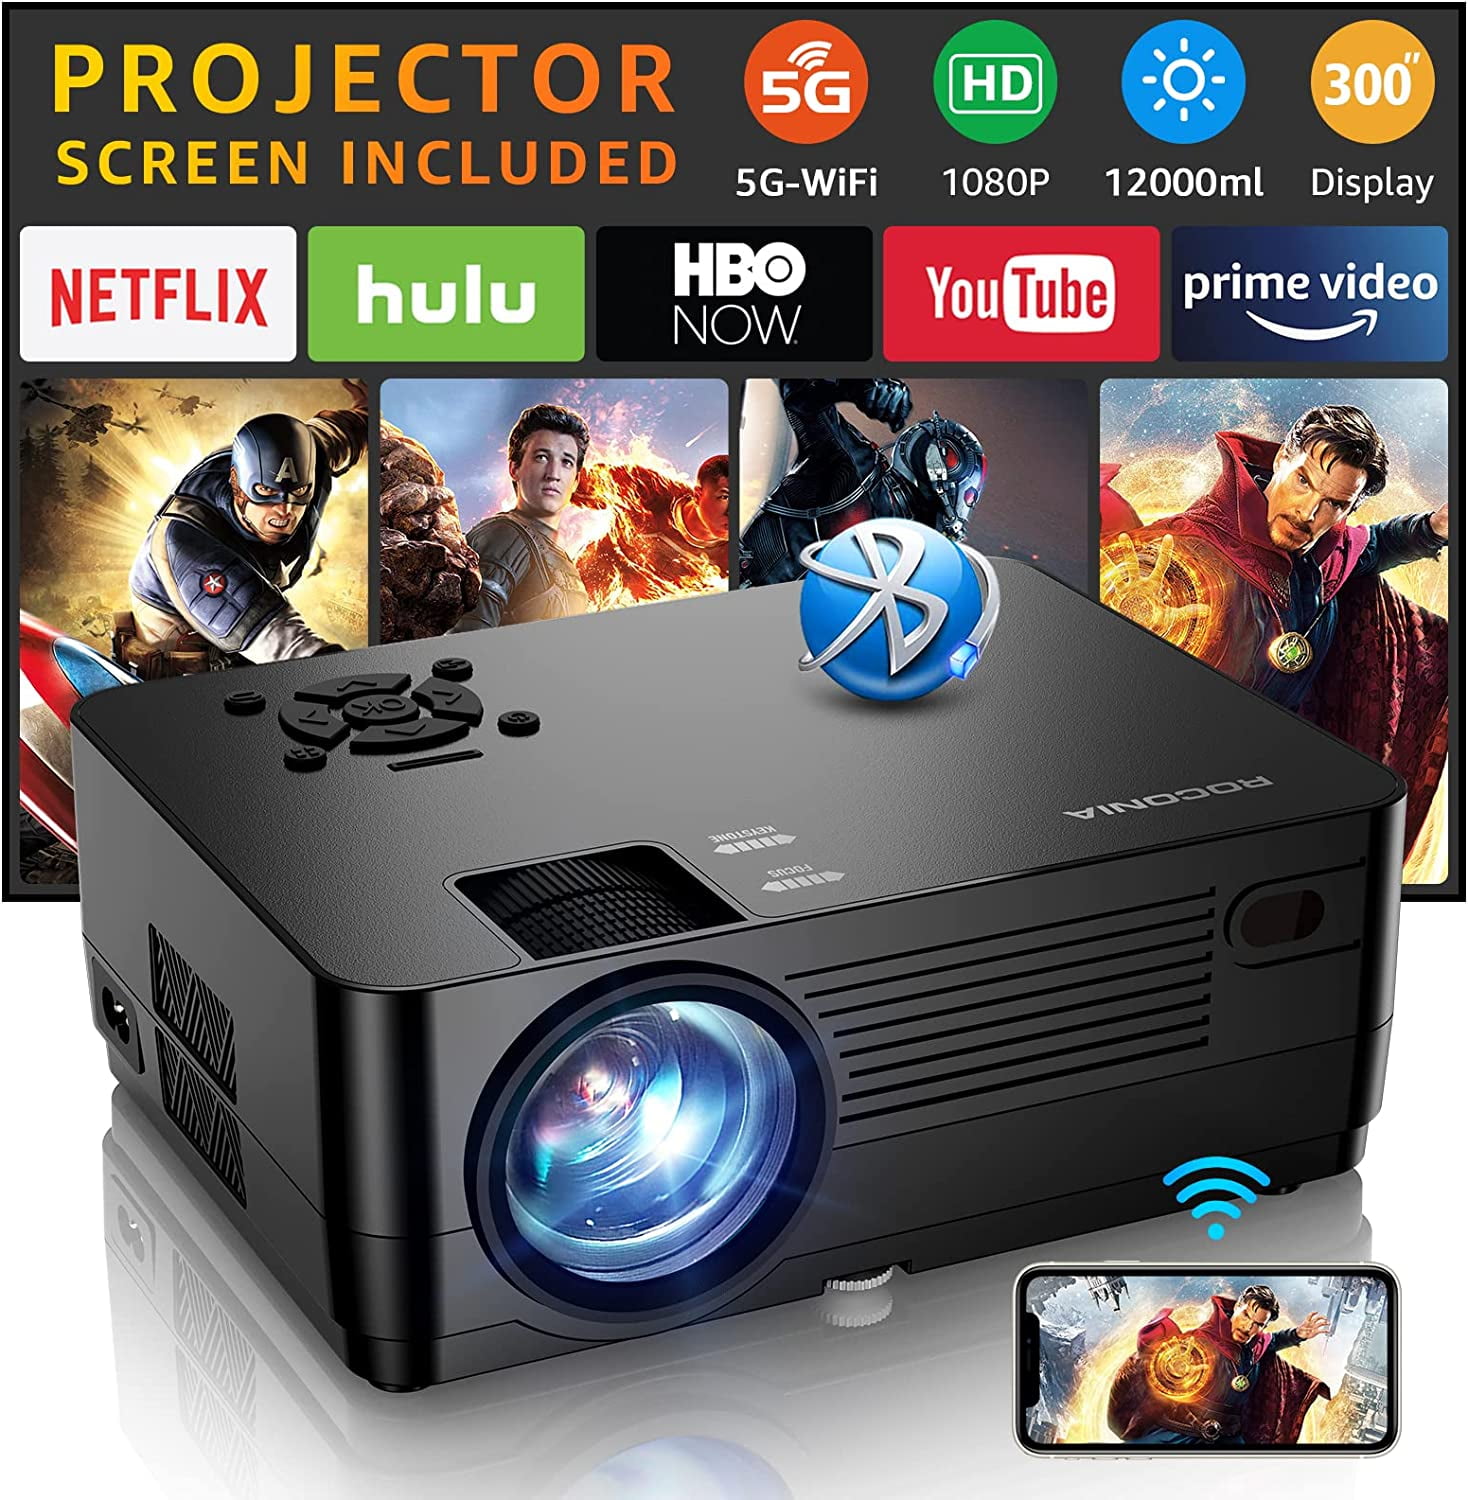 ROCONIA 5G WiFi Bluetooth Native Projector, Full Movie Projector, LCD Technology 300" Display Support 4k Home Theater,(Projector Screen Included) - Walmart.com